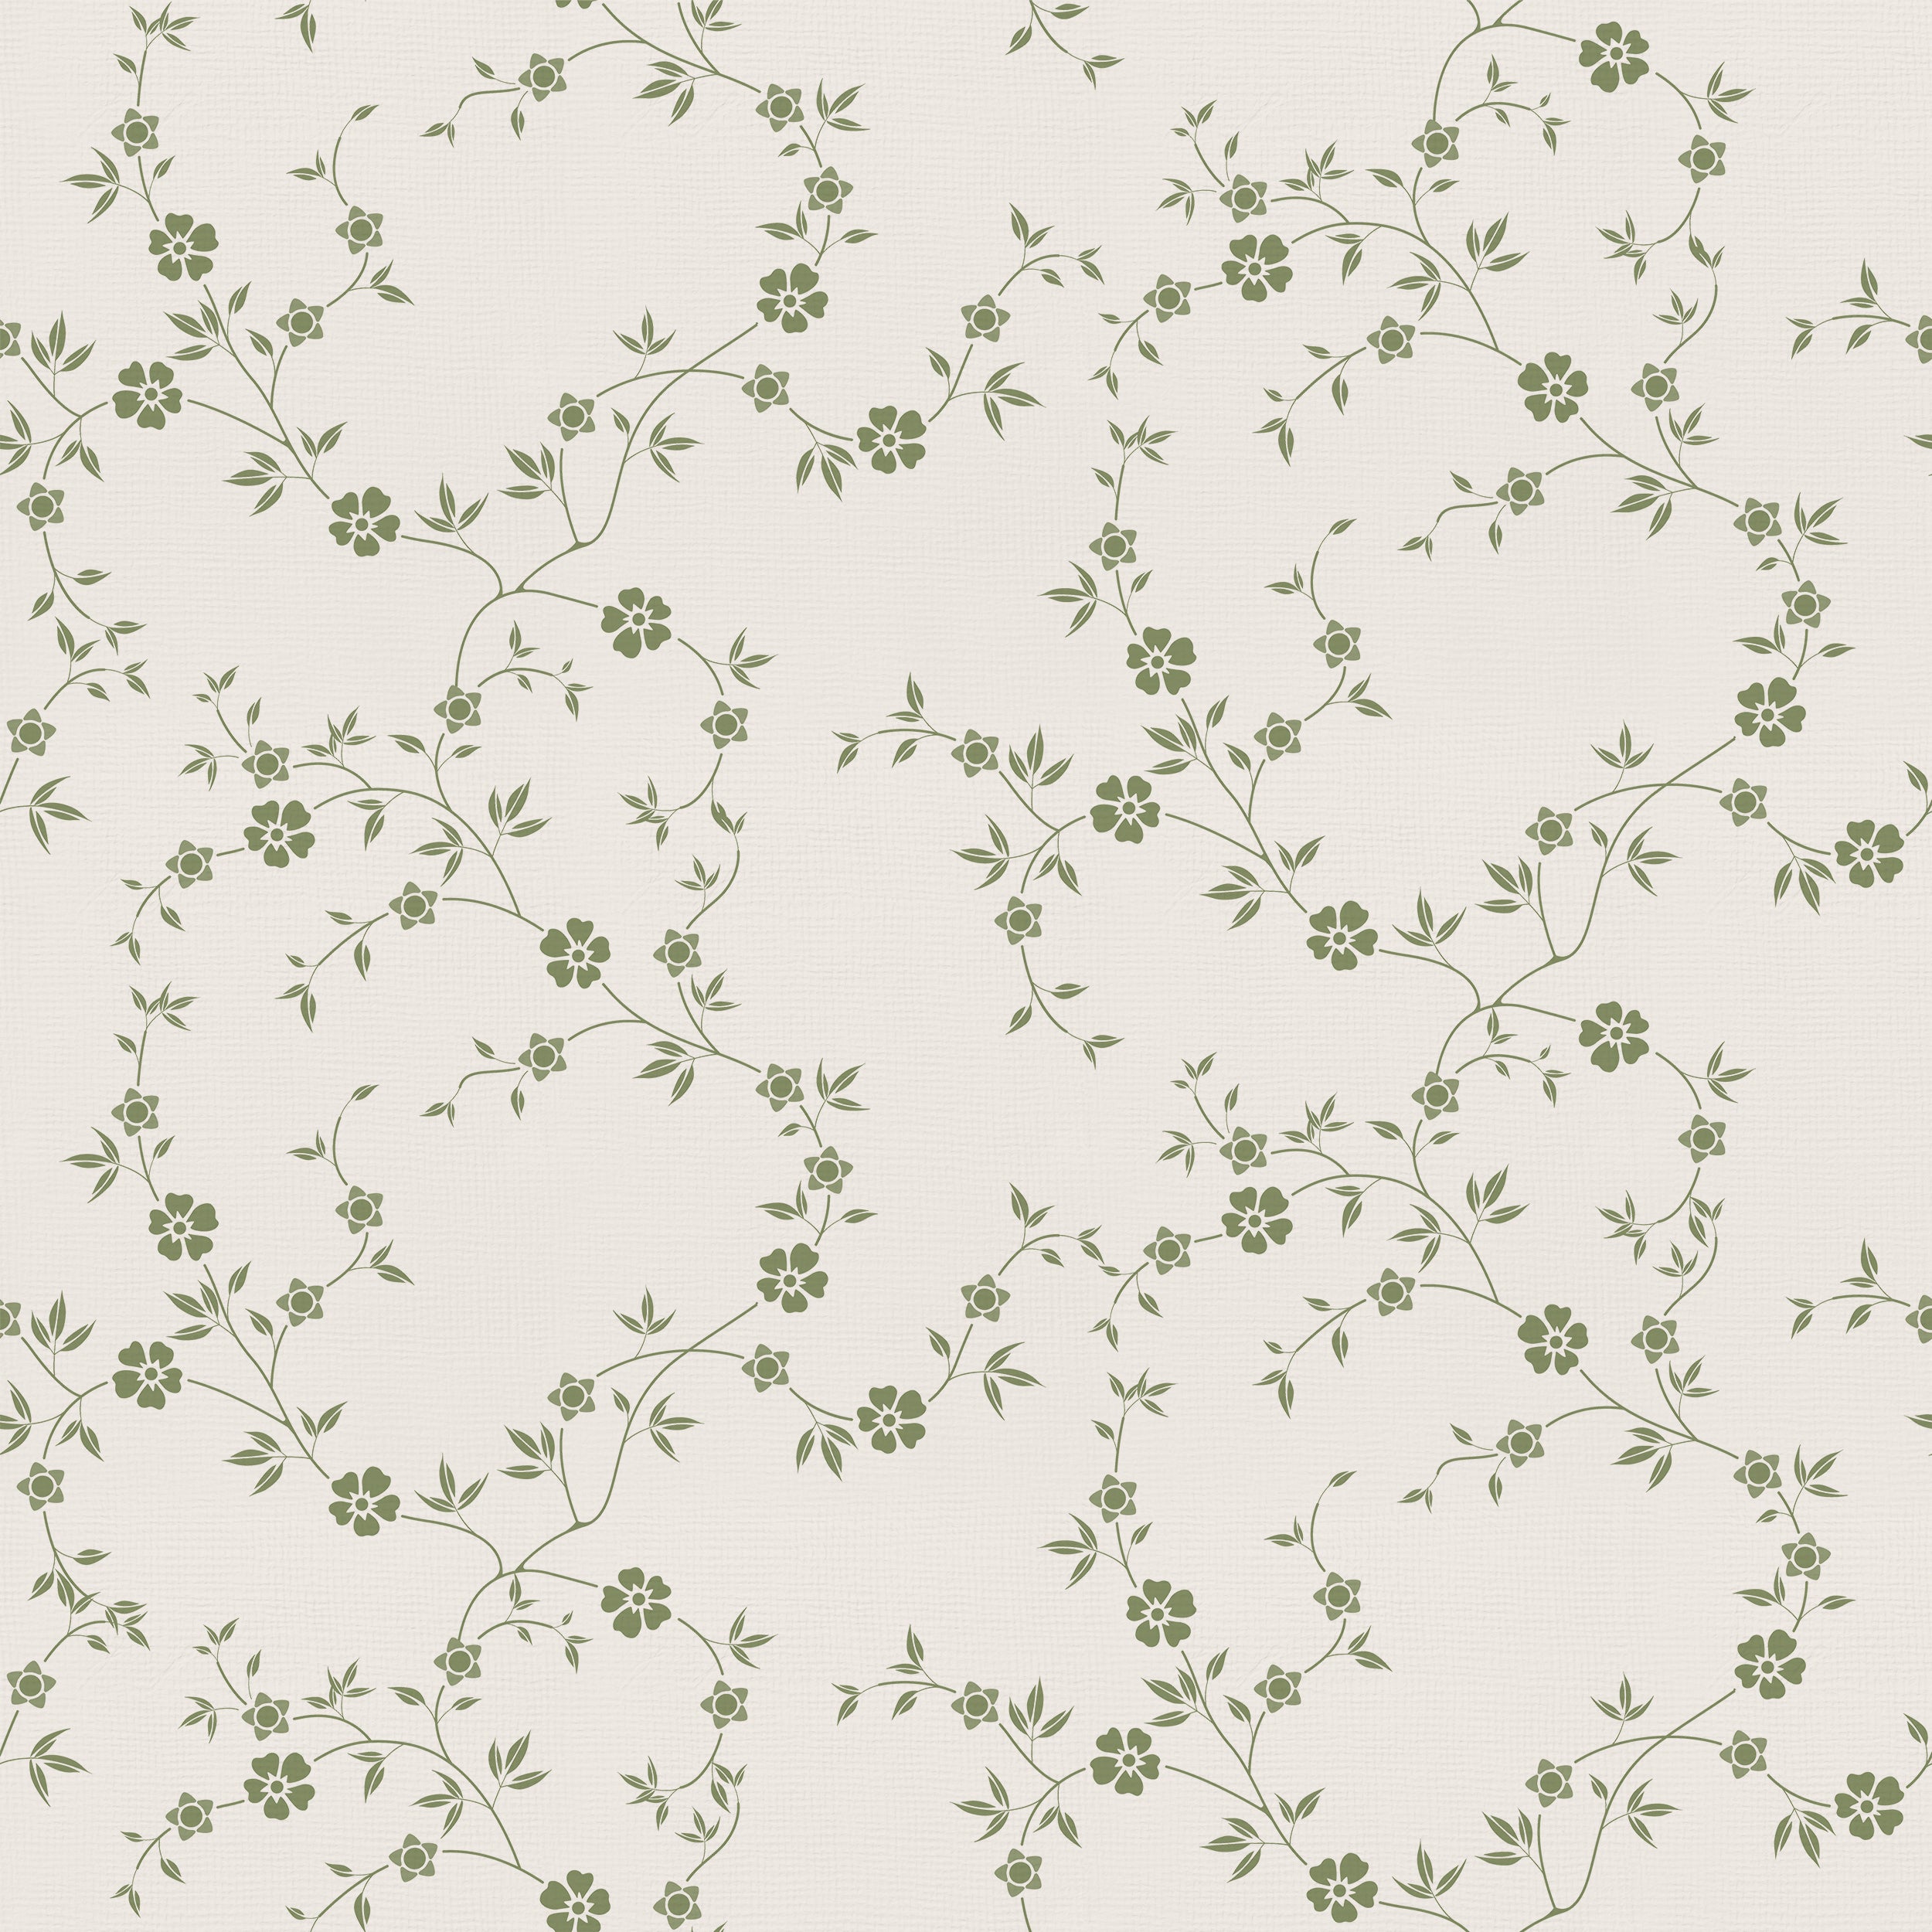 A close-up of the Charming Floral Wallpaper-Moss, displaying a detailed and seamless pattern of small green flowers and leaves, set against a soothing beige background that evokes a feeling of nature's calm.